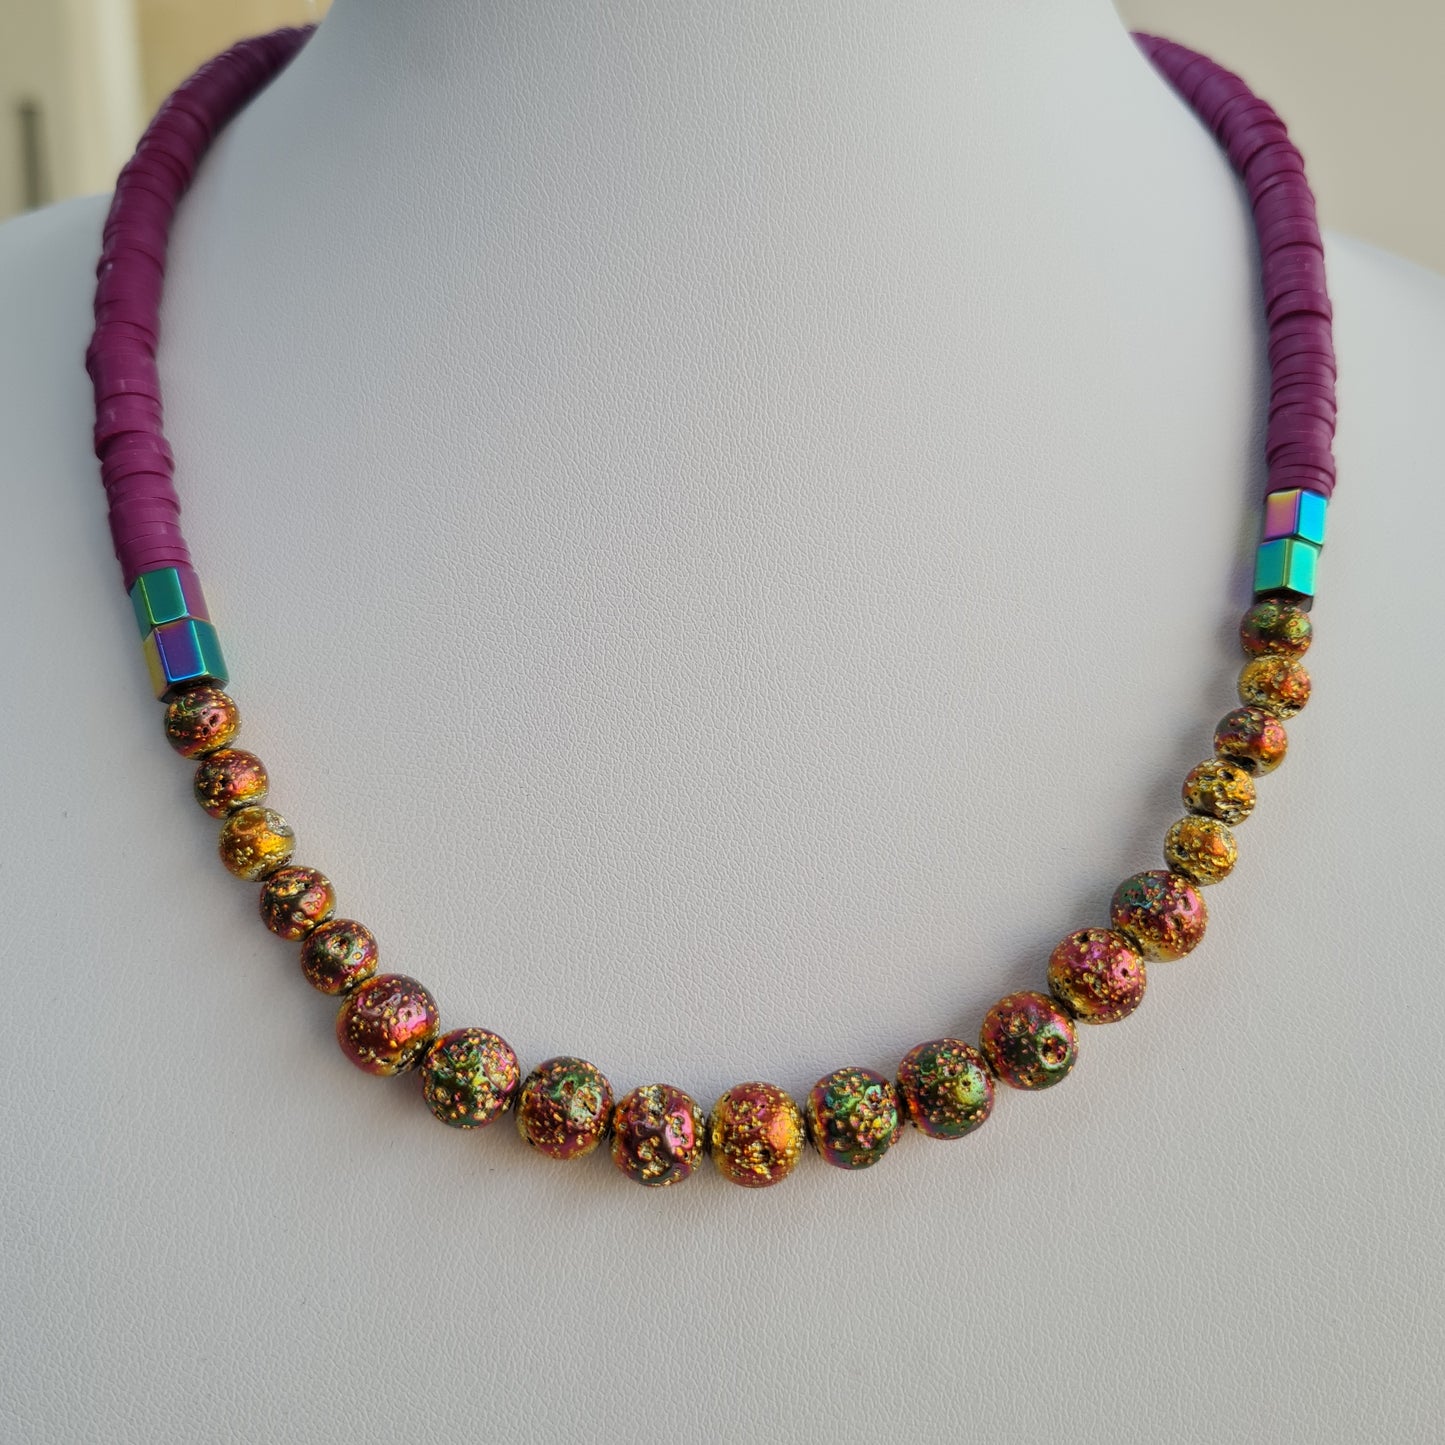 Surfer beads "Cosmos" necklace